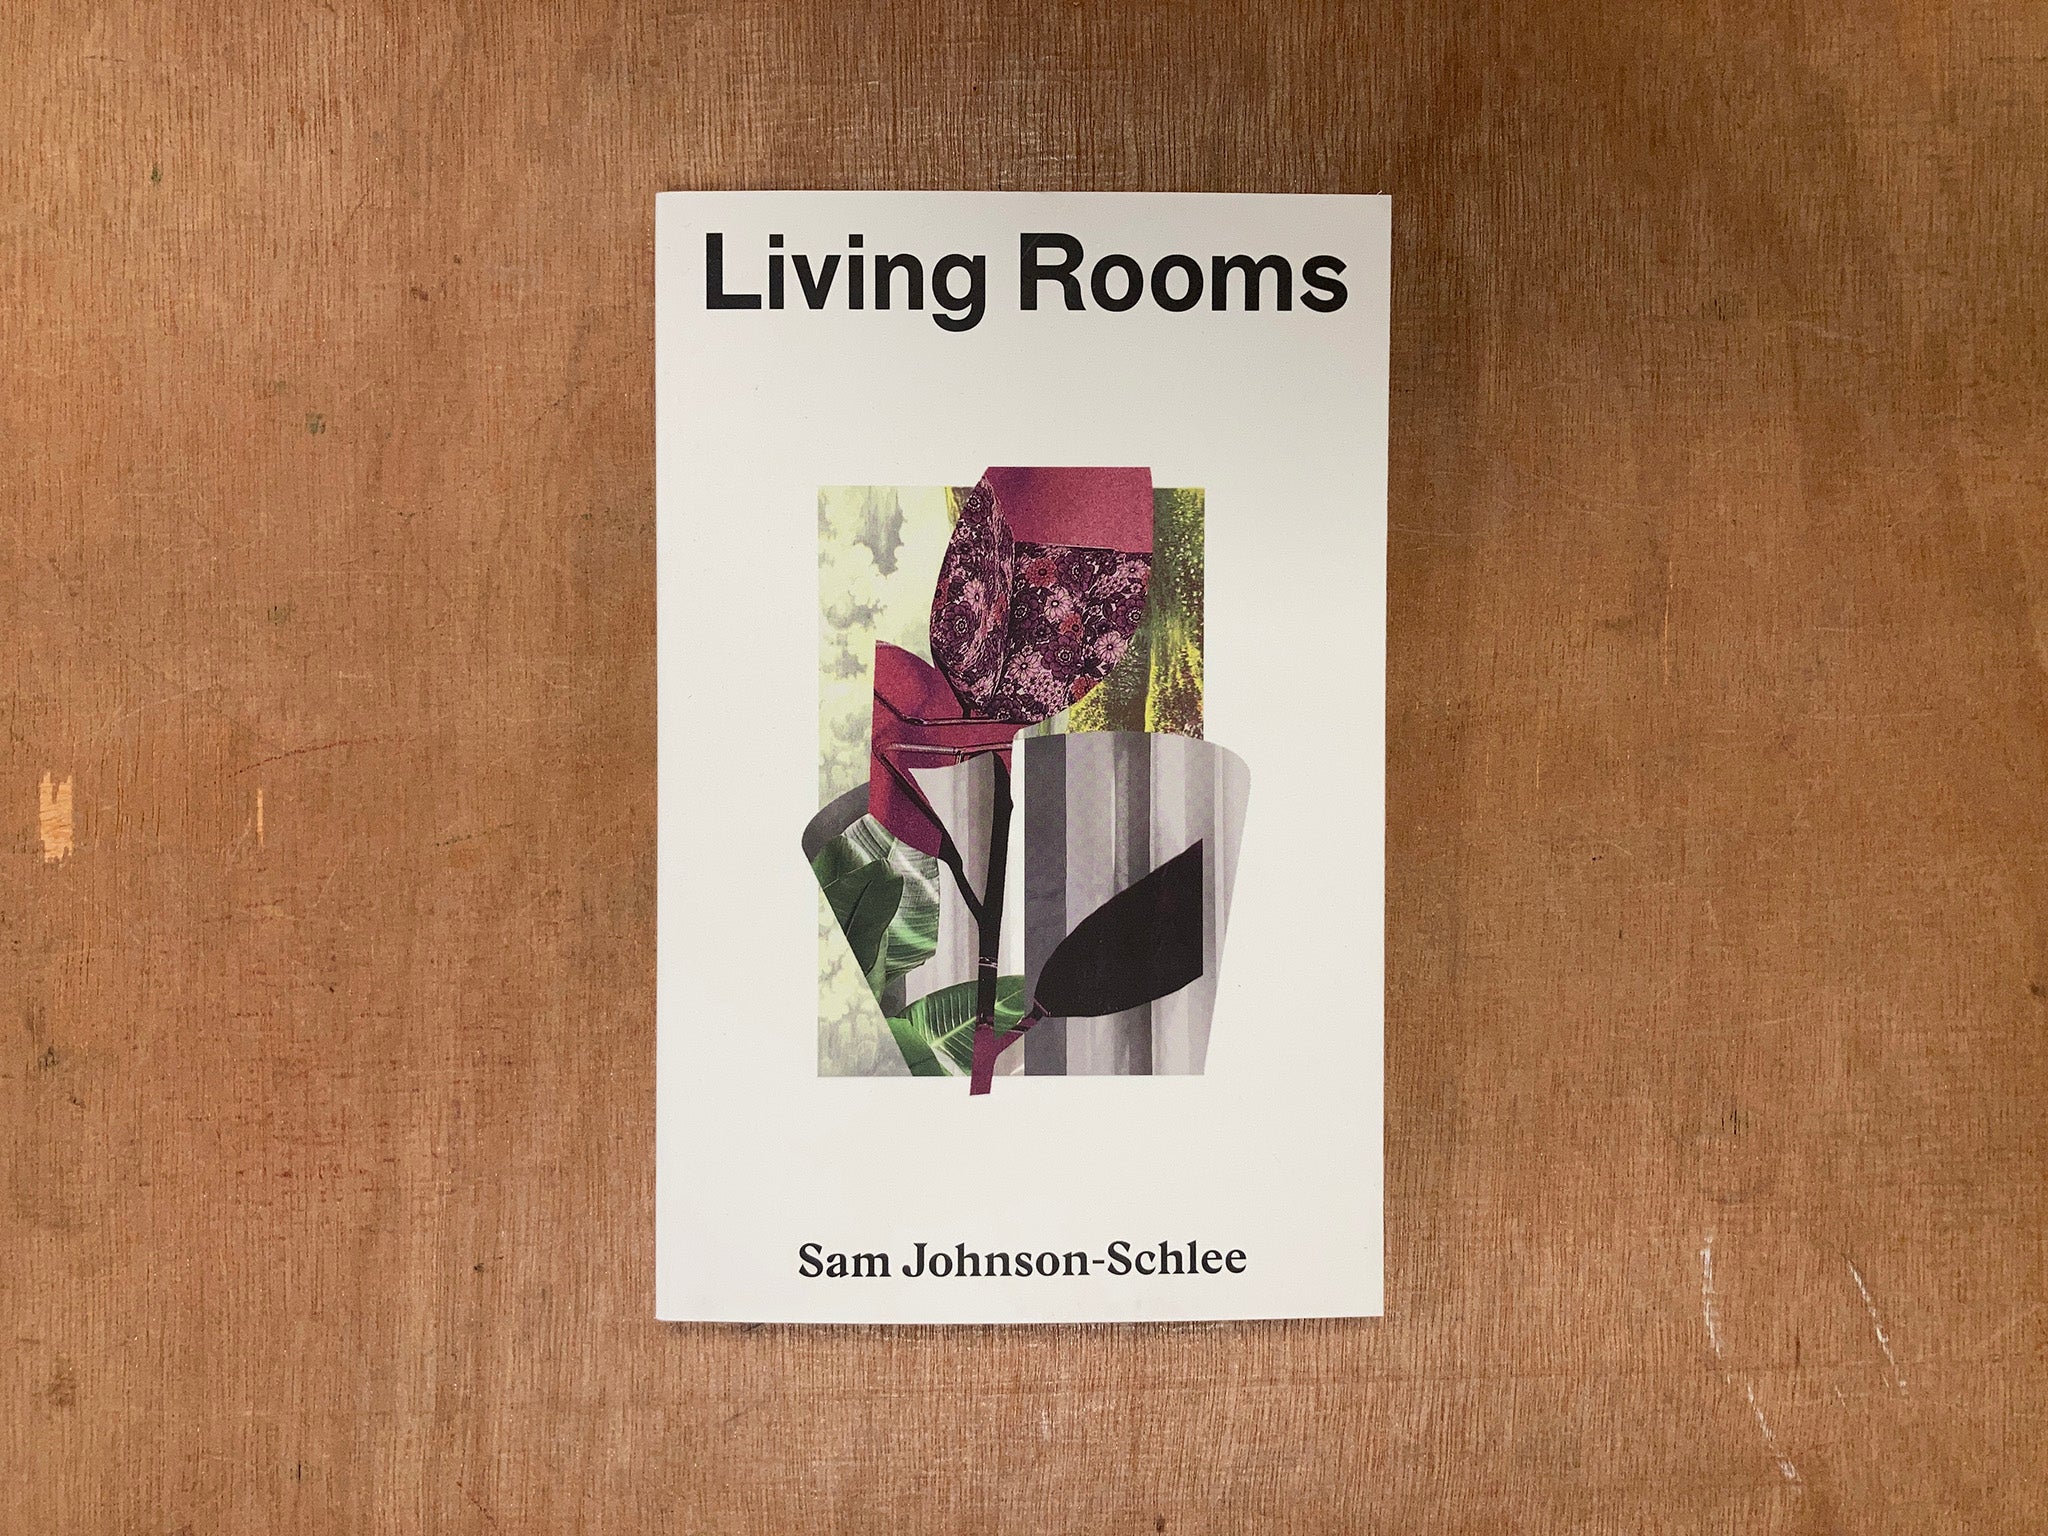 LIVING ROOMS by Sam Johnson-Schlee